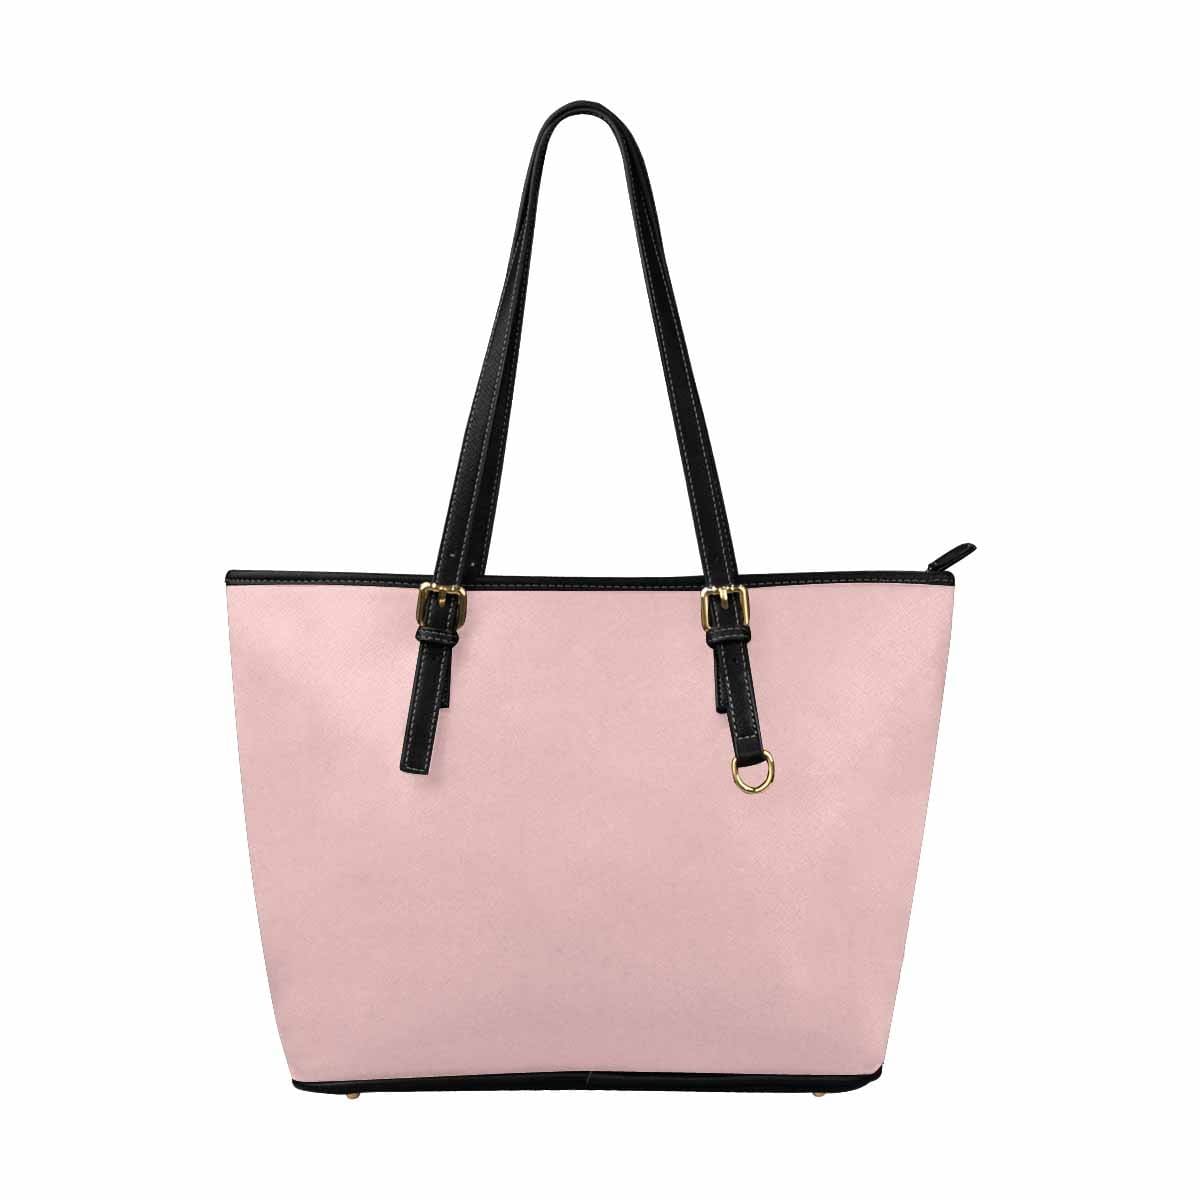 Large Leather Tote Shoulder Bag - Rose Quartz Red - Bags | Leather Tote Bags